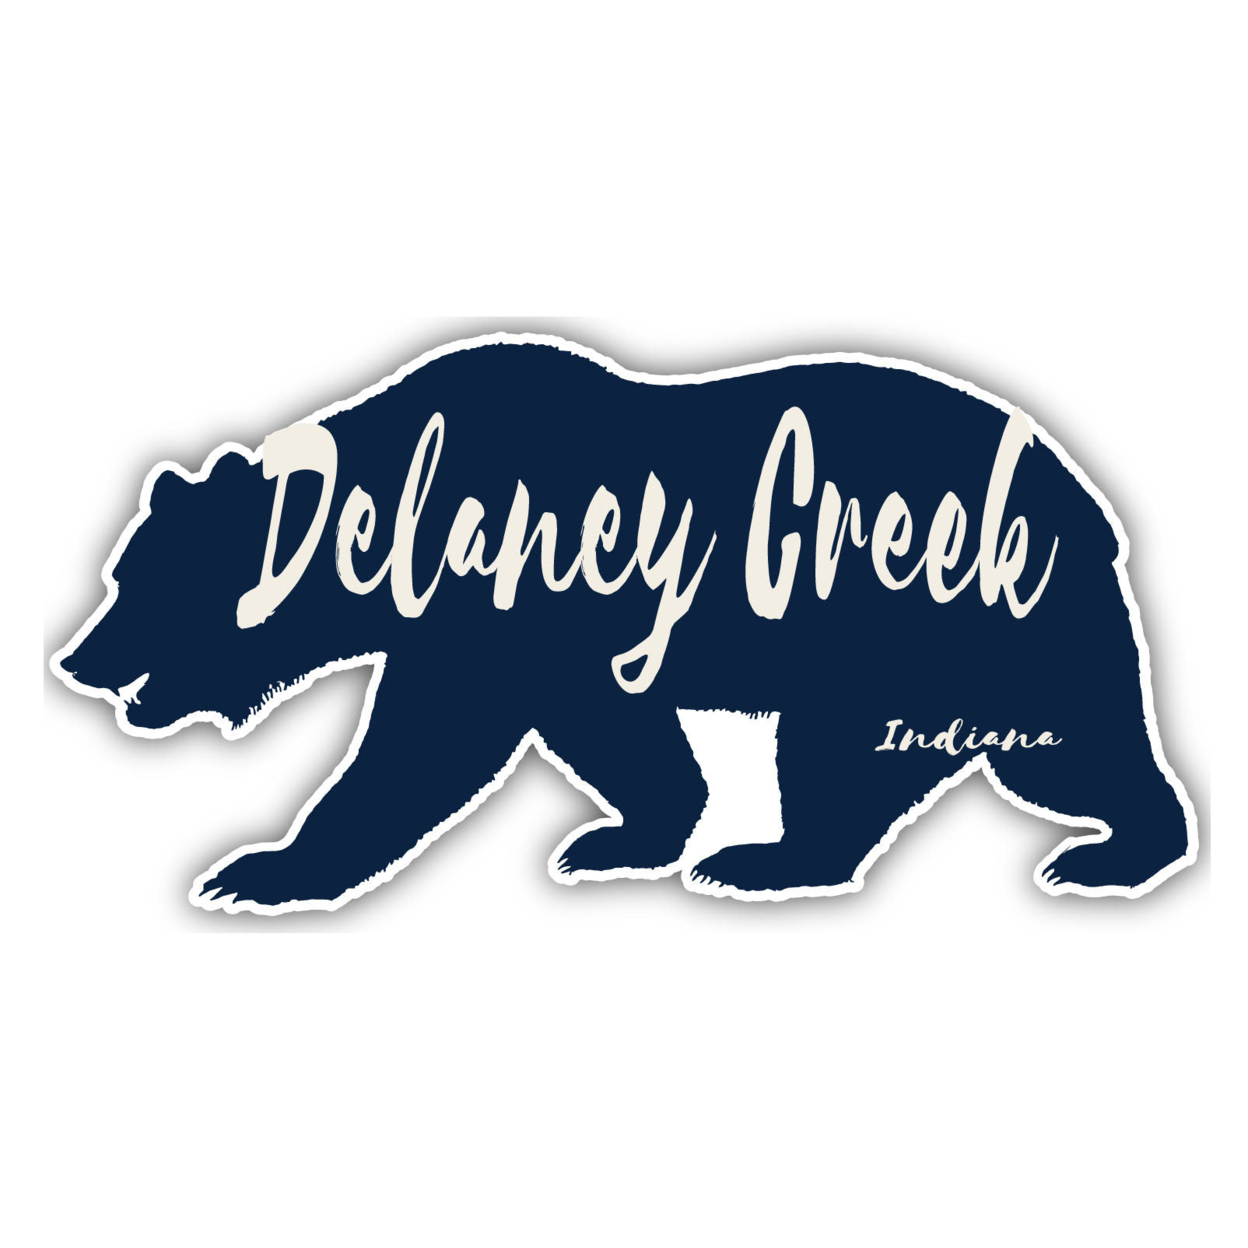 Delaney Creek Indiana Souvenir Decorative Stickers (Choose Theme And Size) - 4-Pack, 12-Inch, Bear